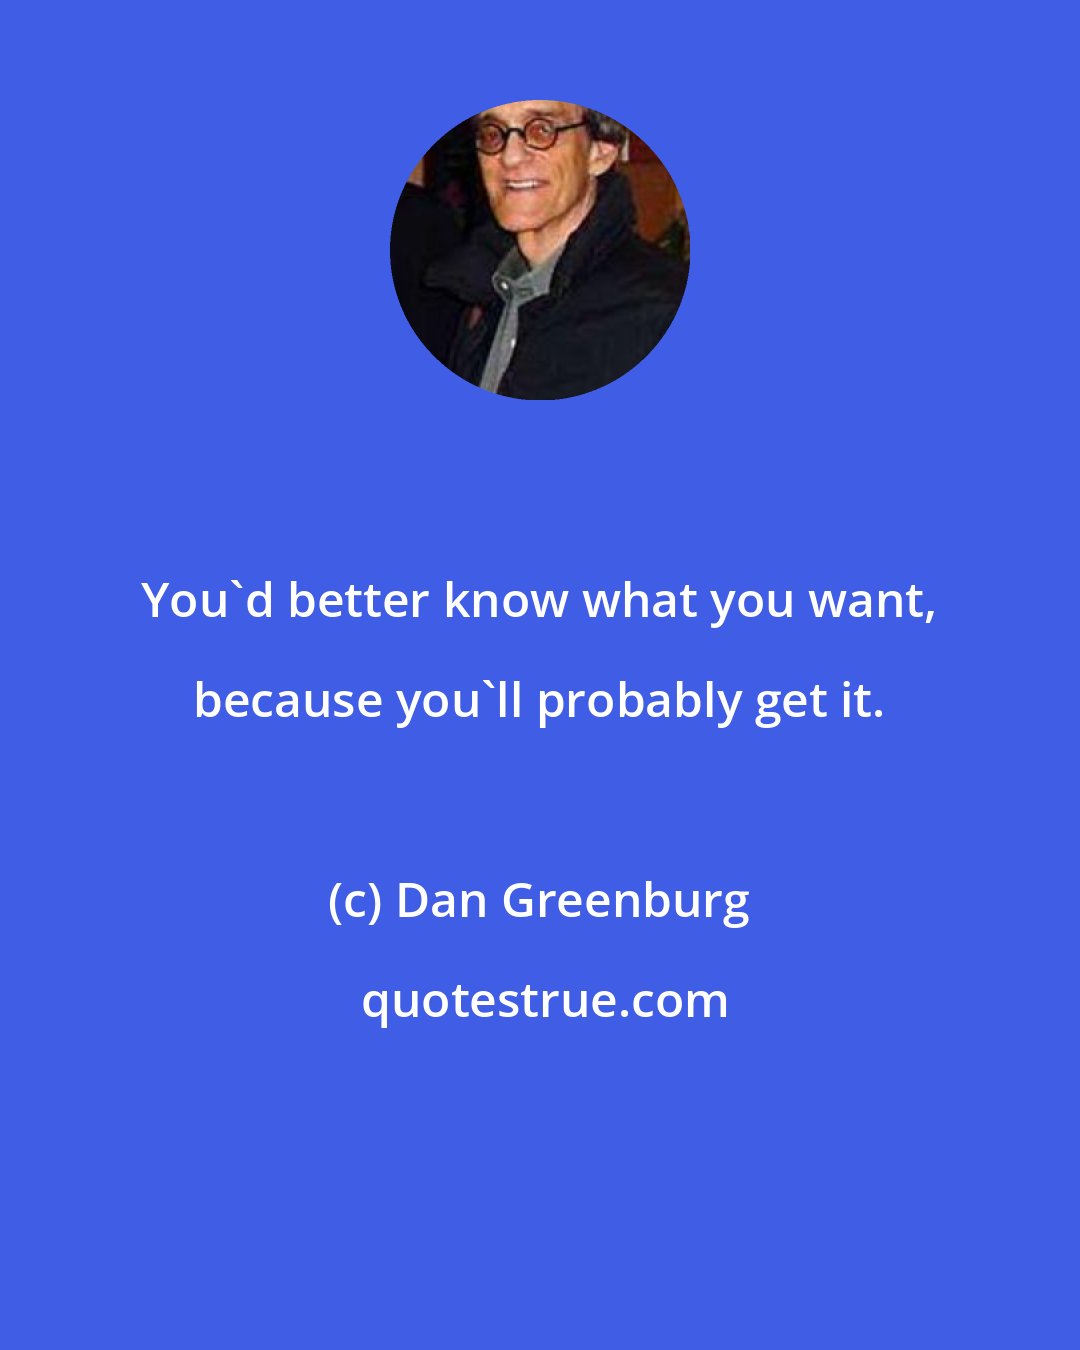 Dan Greenburg: You'd better know what you want, because you'll probably get it.